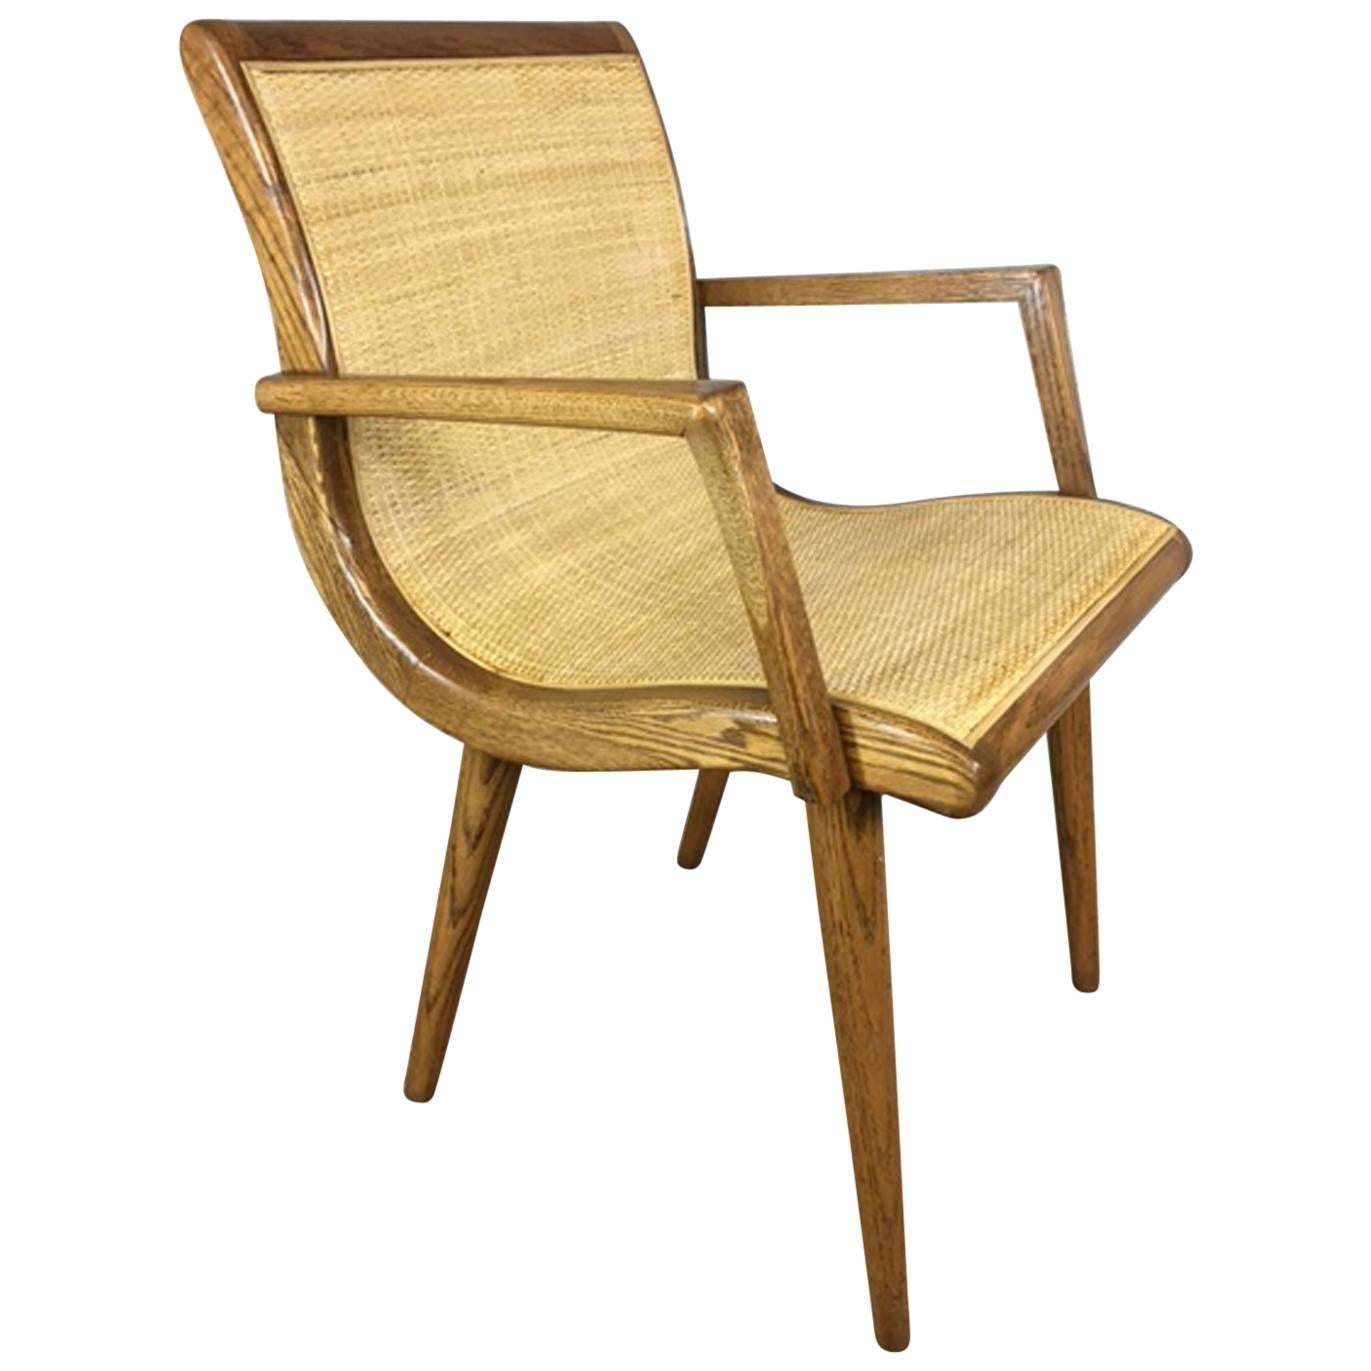 Oak Slipper Chair with Cane Sling